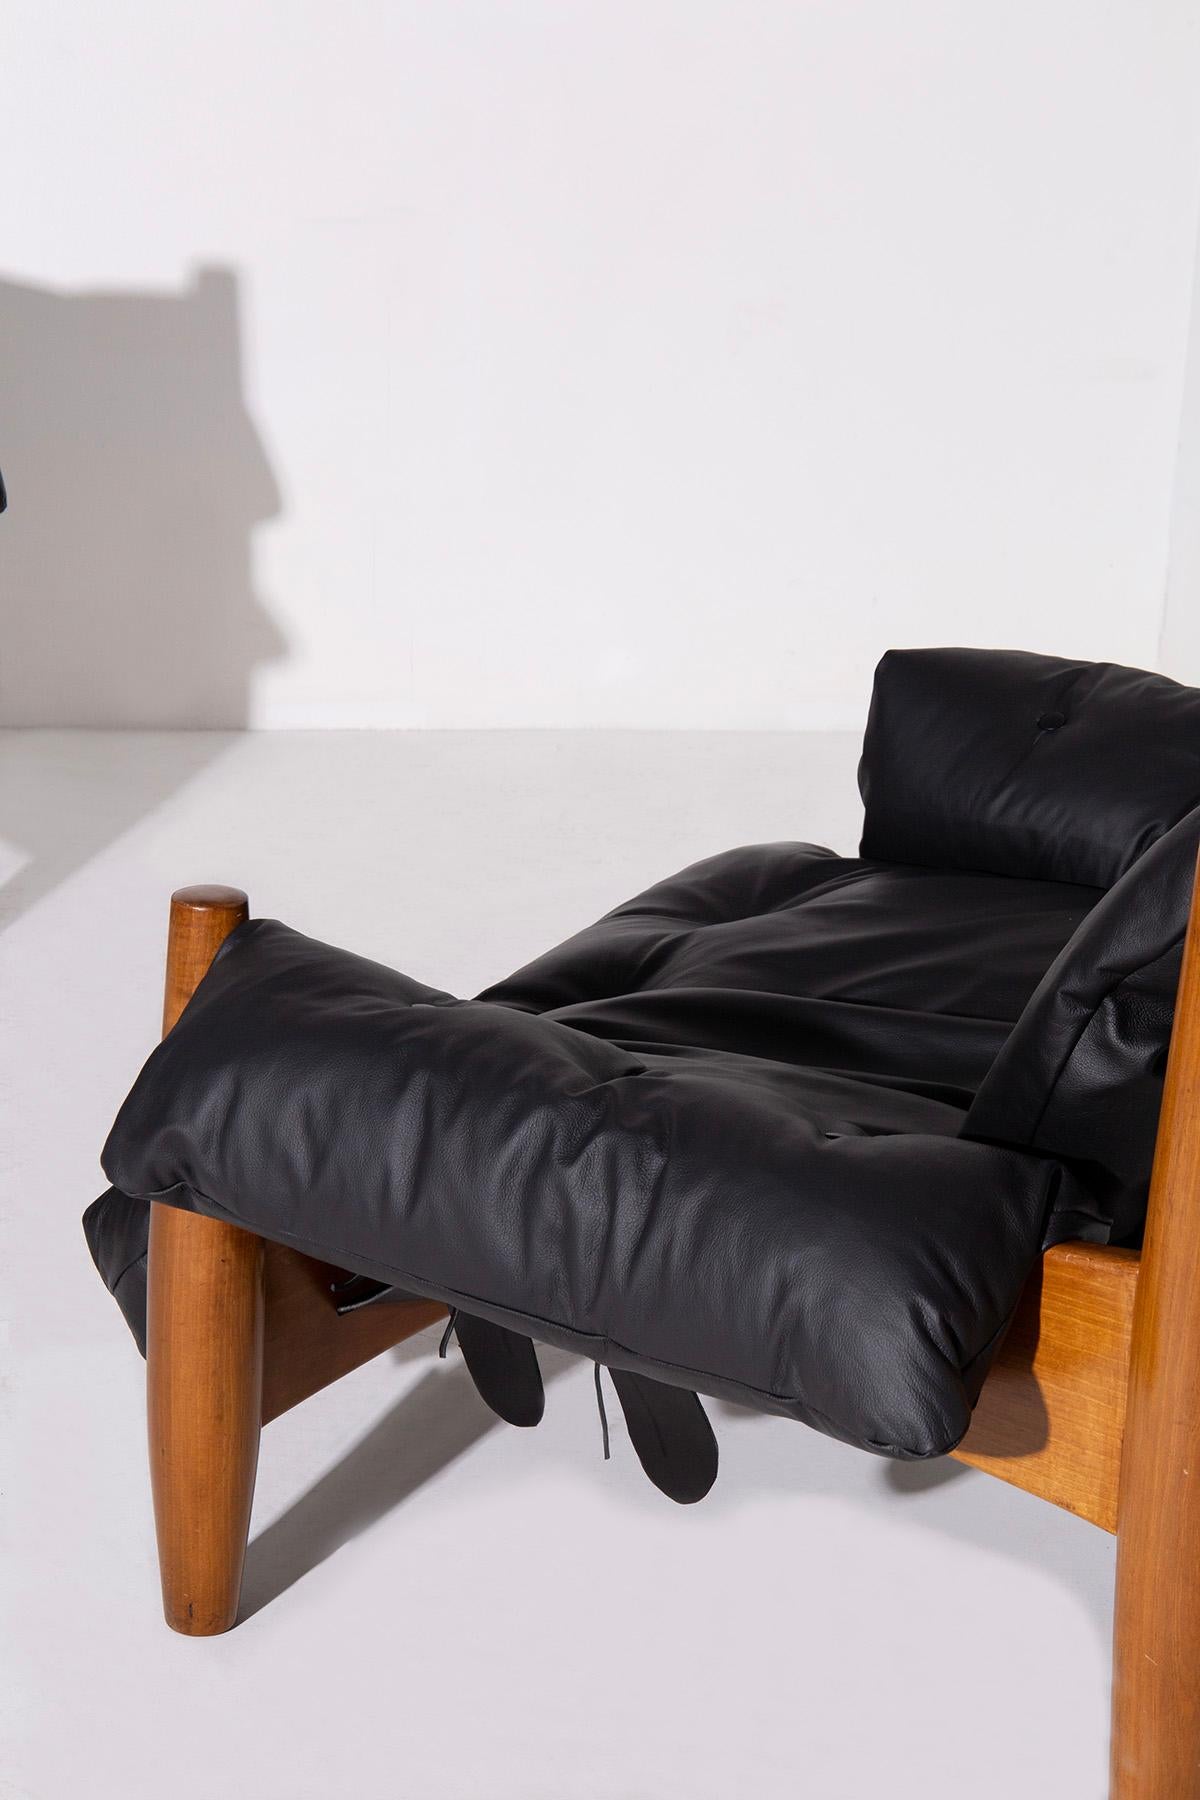 Brazilian Black Leather “Sheriff” Armchairs by Sergio Rodrigues